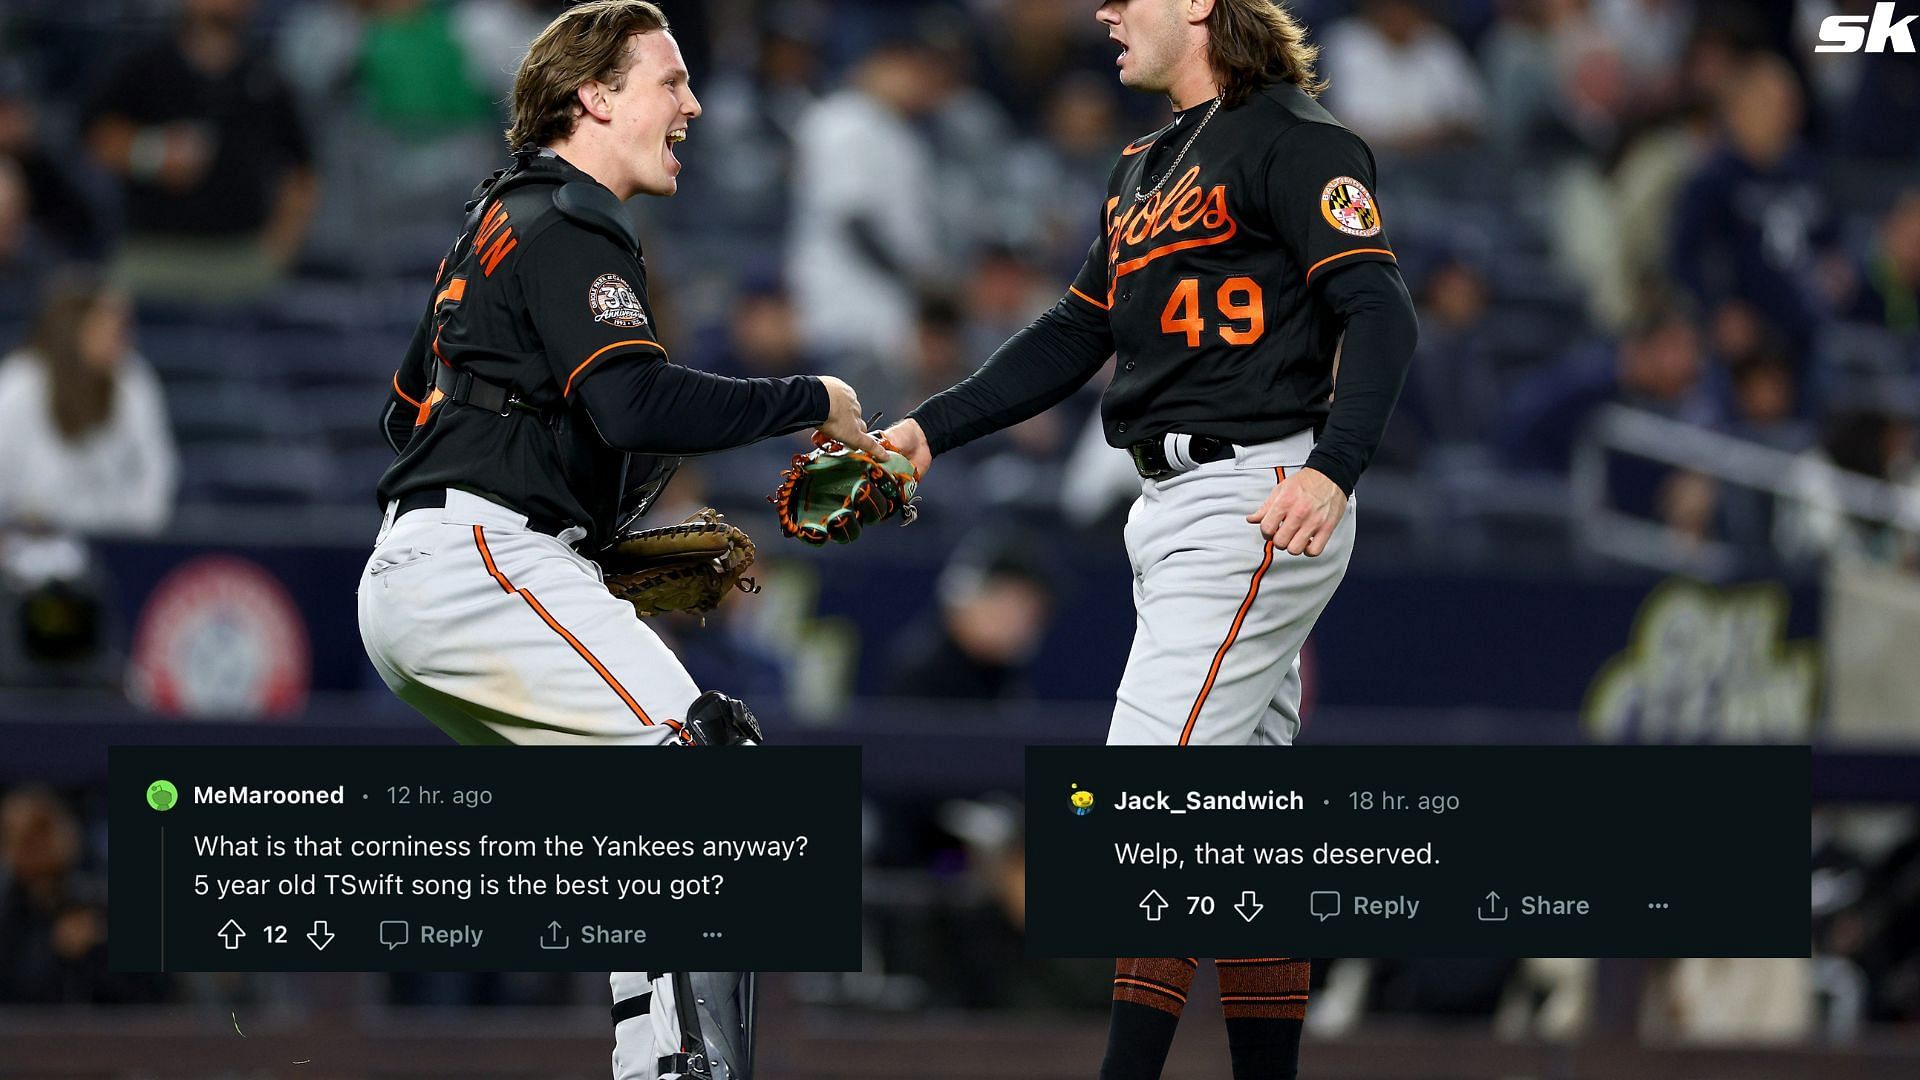 Adley Rutschman and DL Hall of the Baltimore Orioles celebrate the win over the New York Yankees